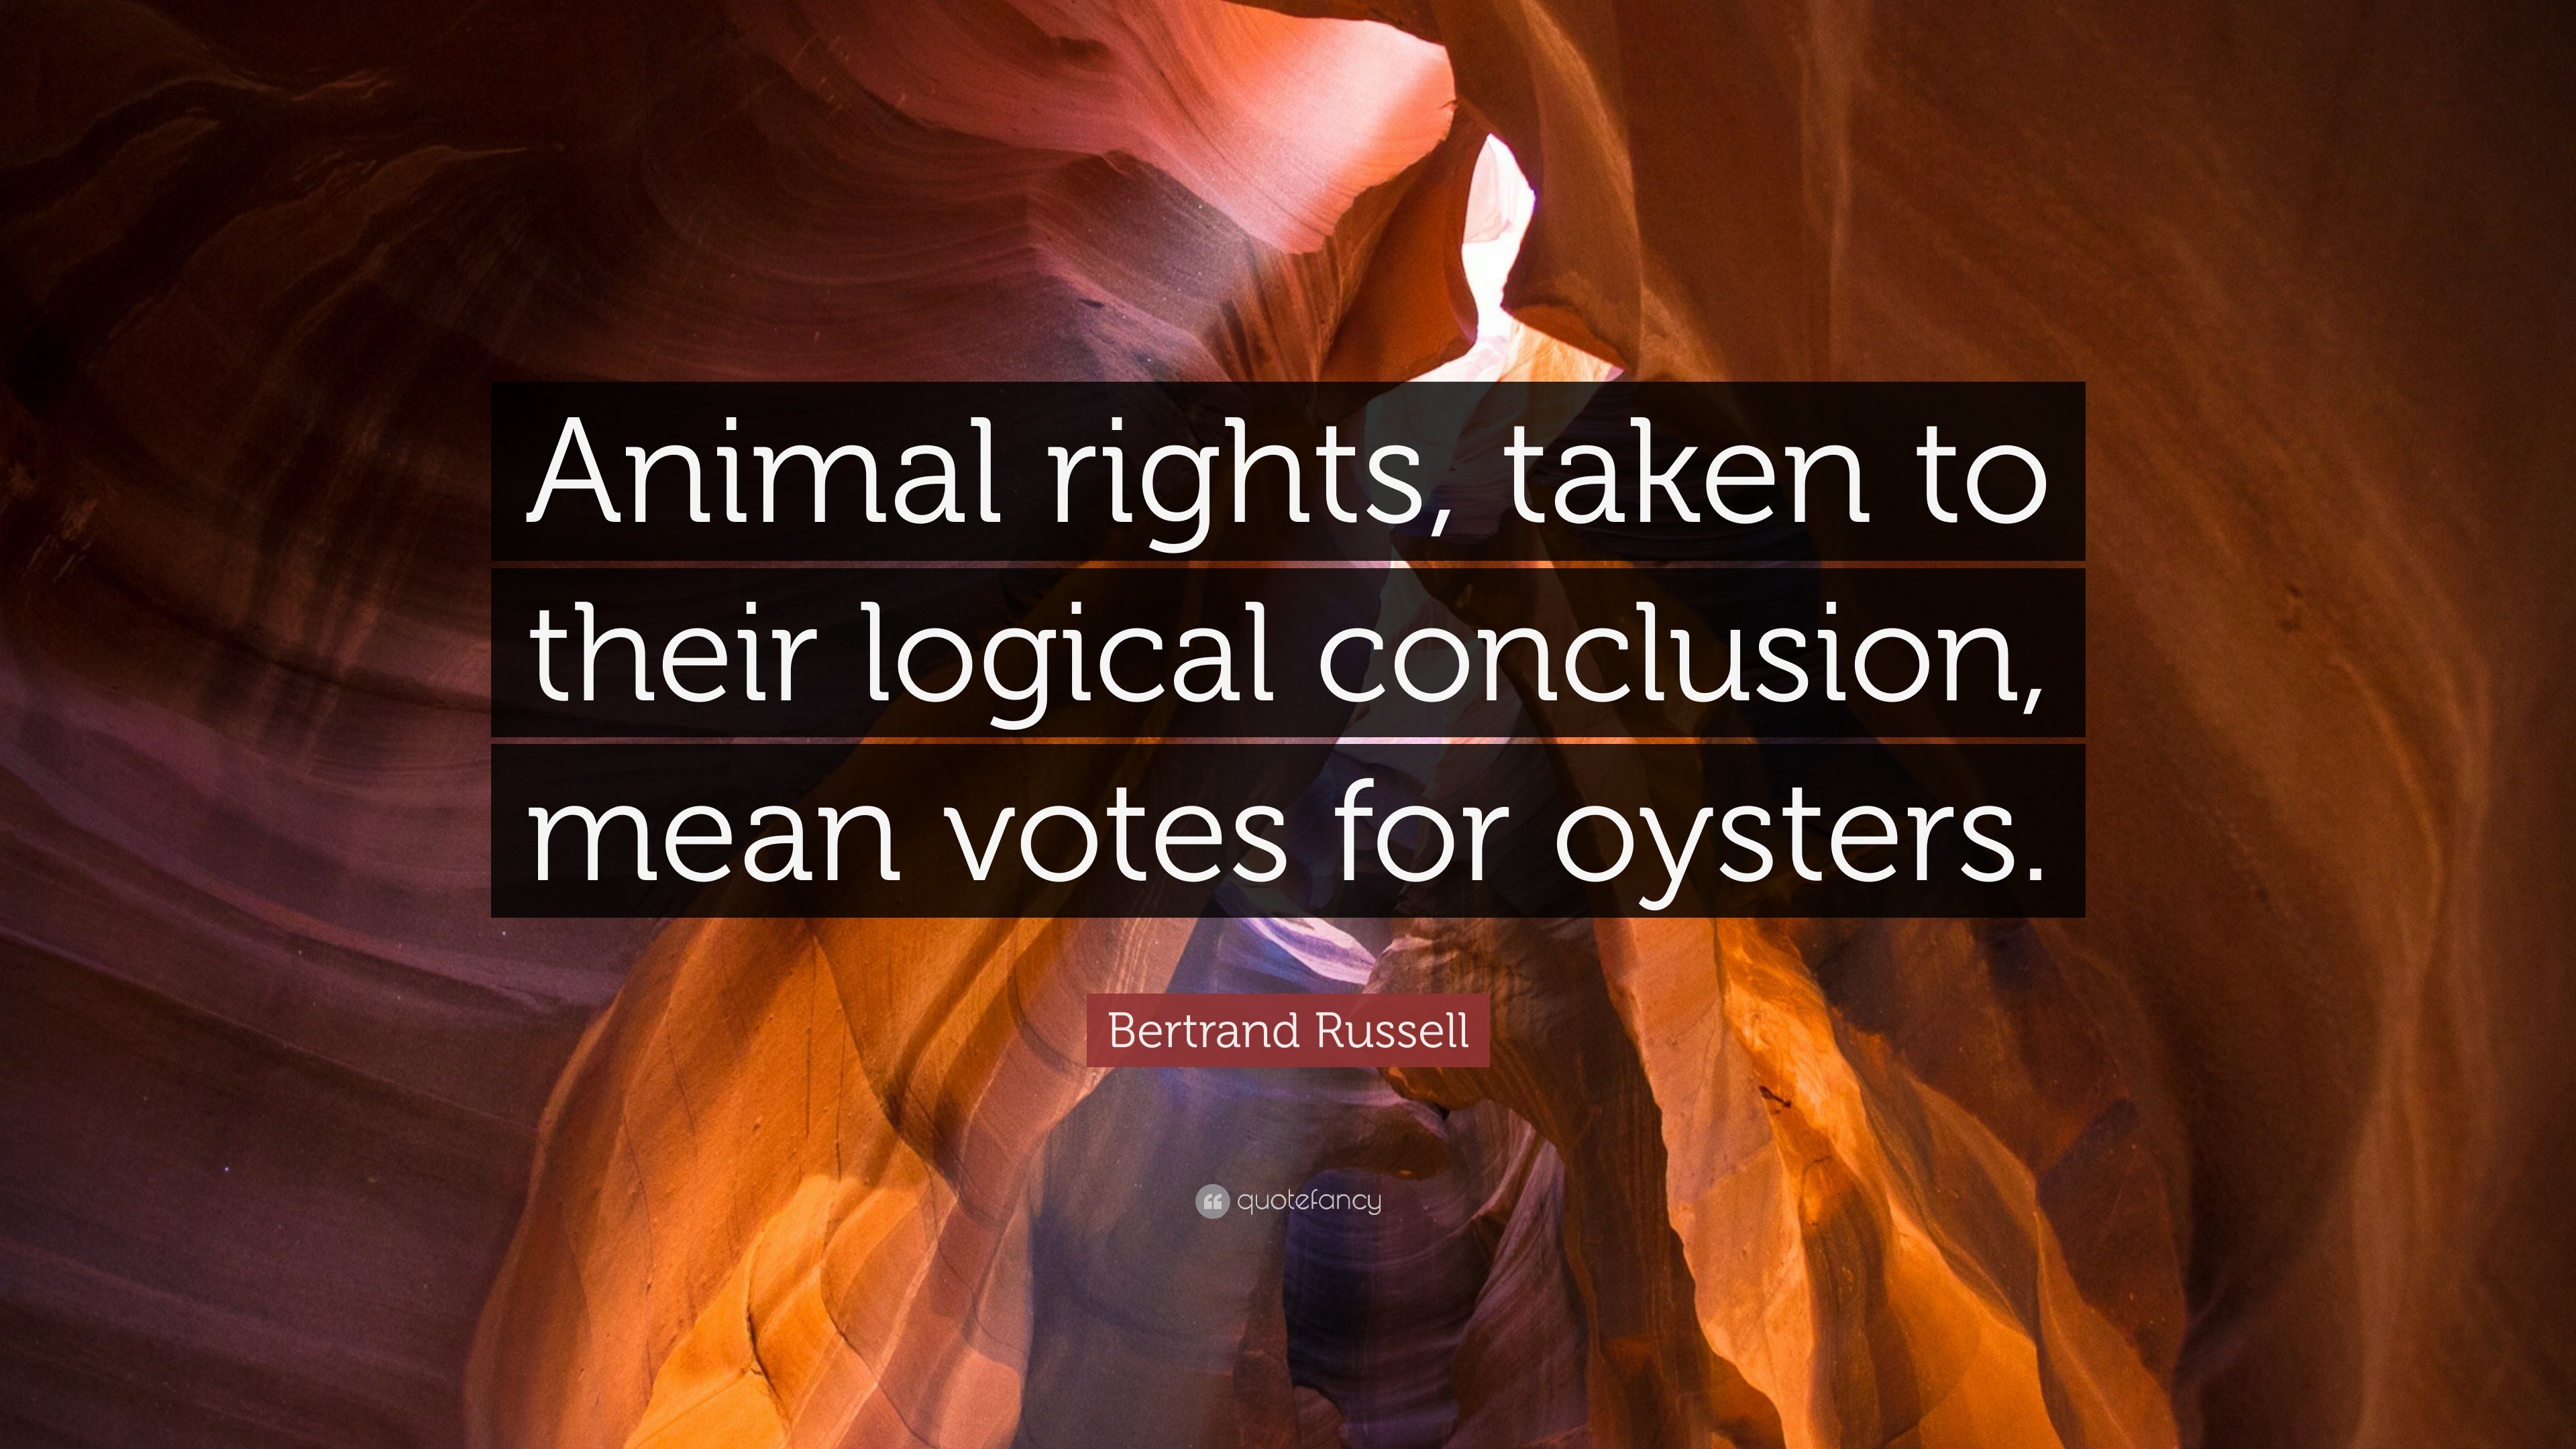 Bertrand Russell Quote: “Animal rights, taken to their logical conclusion,  mean votes for oysters.”